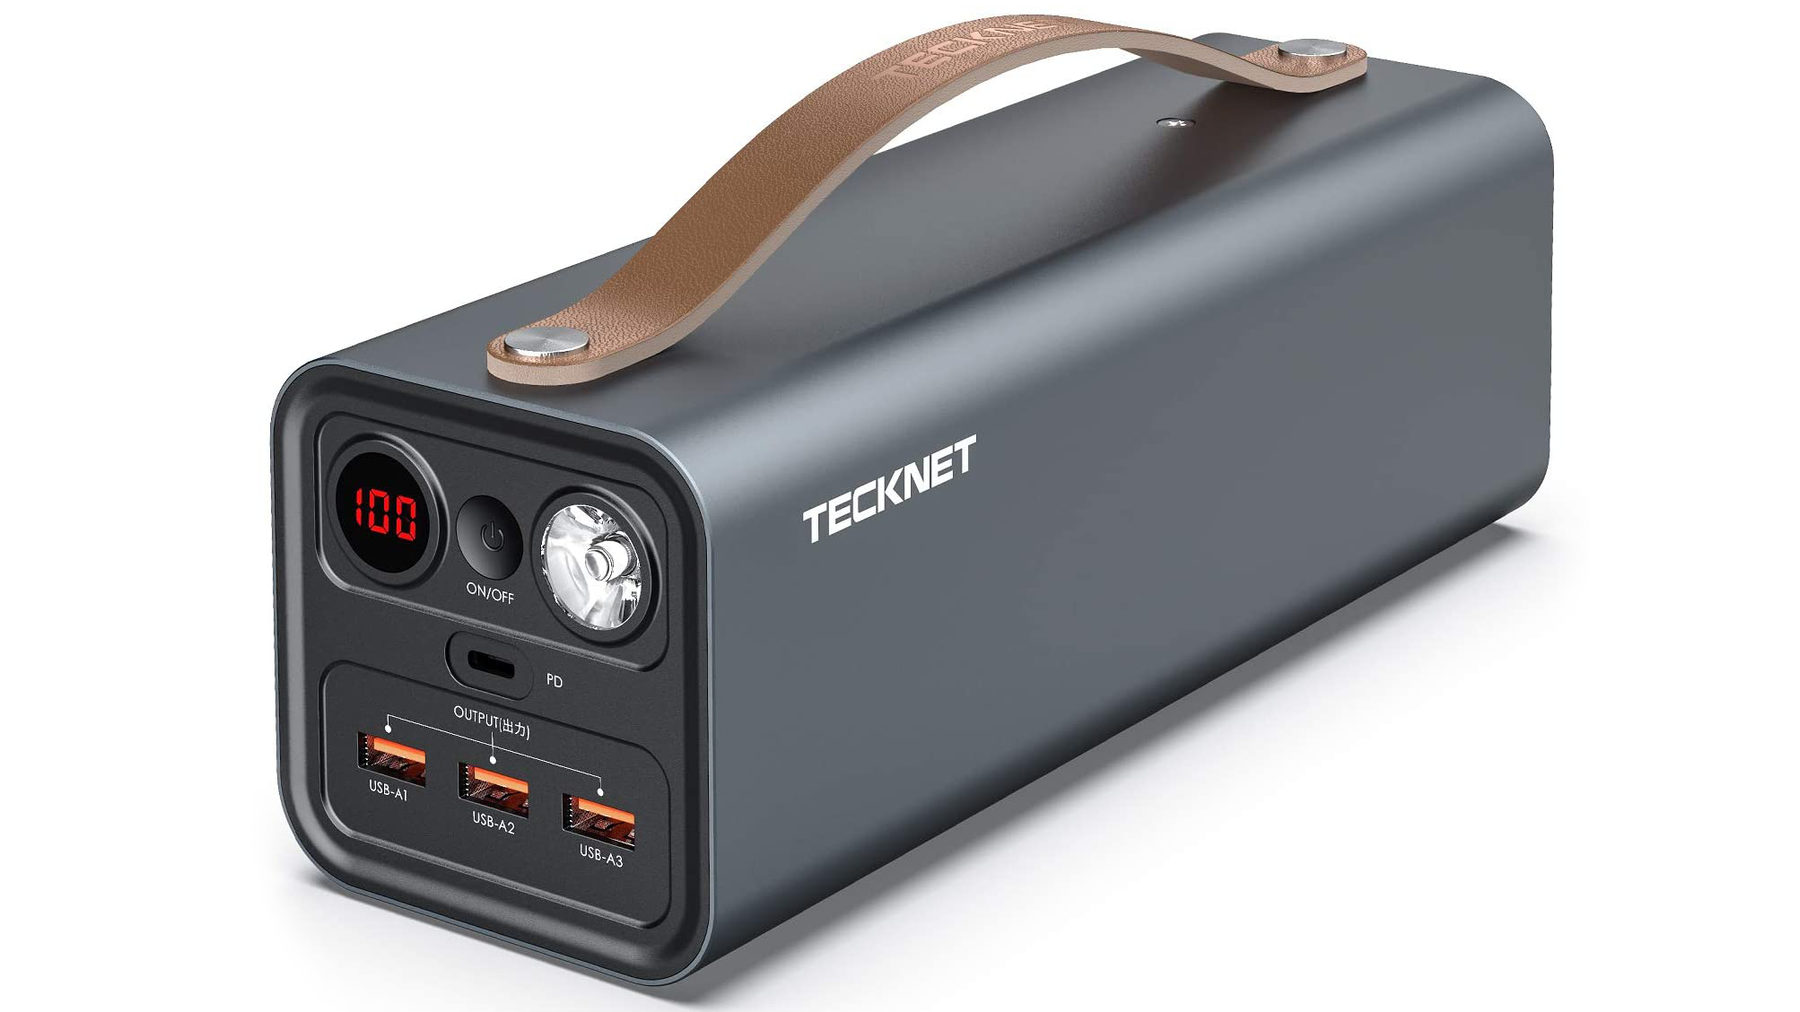 Tecknet Portable Laptop Charger - The best portable chargers